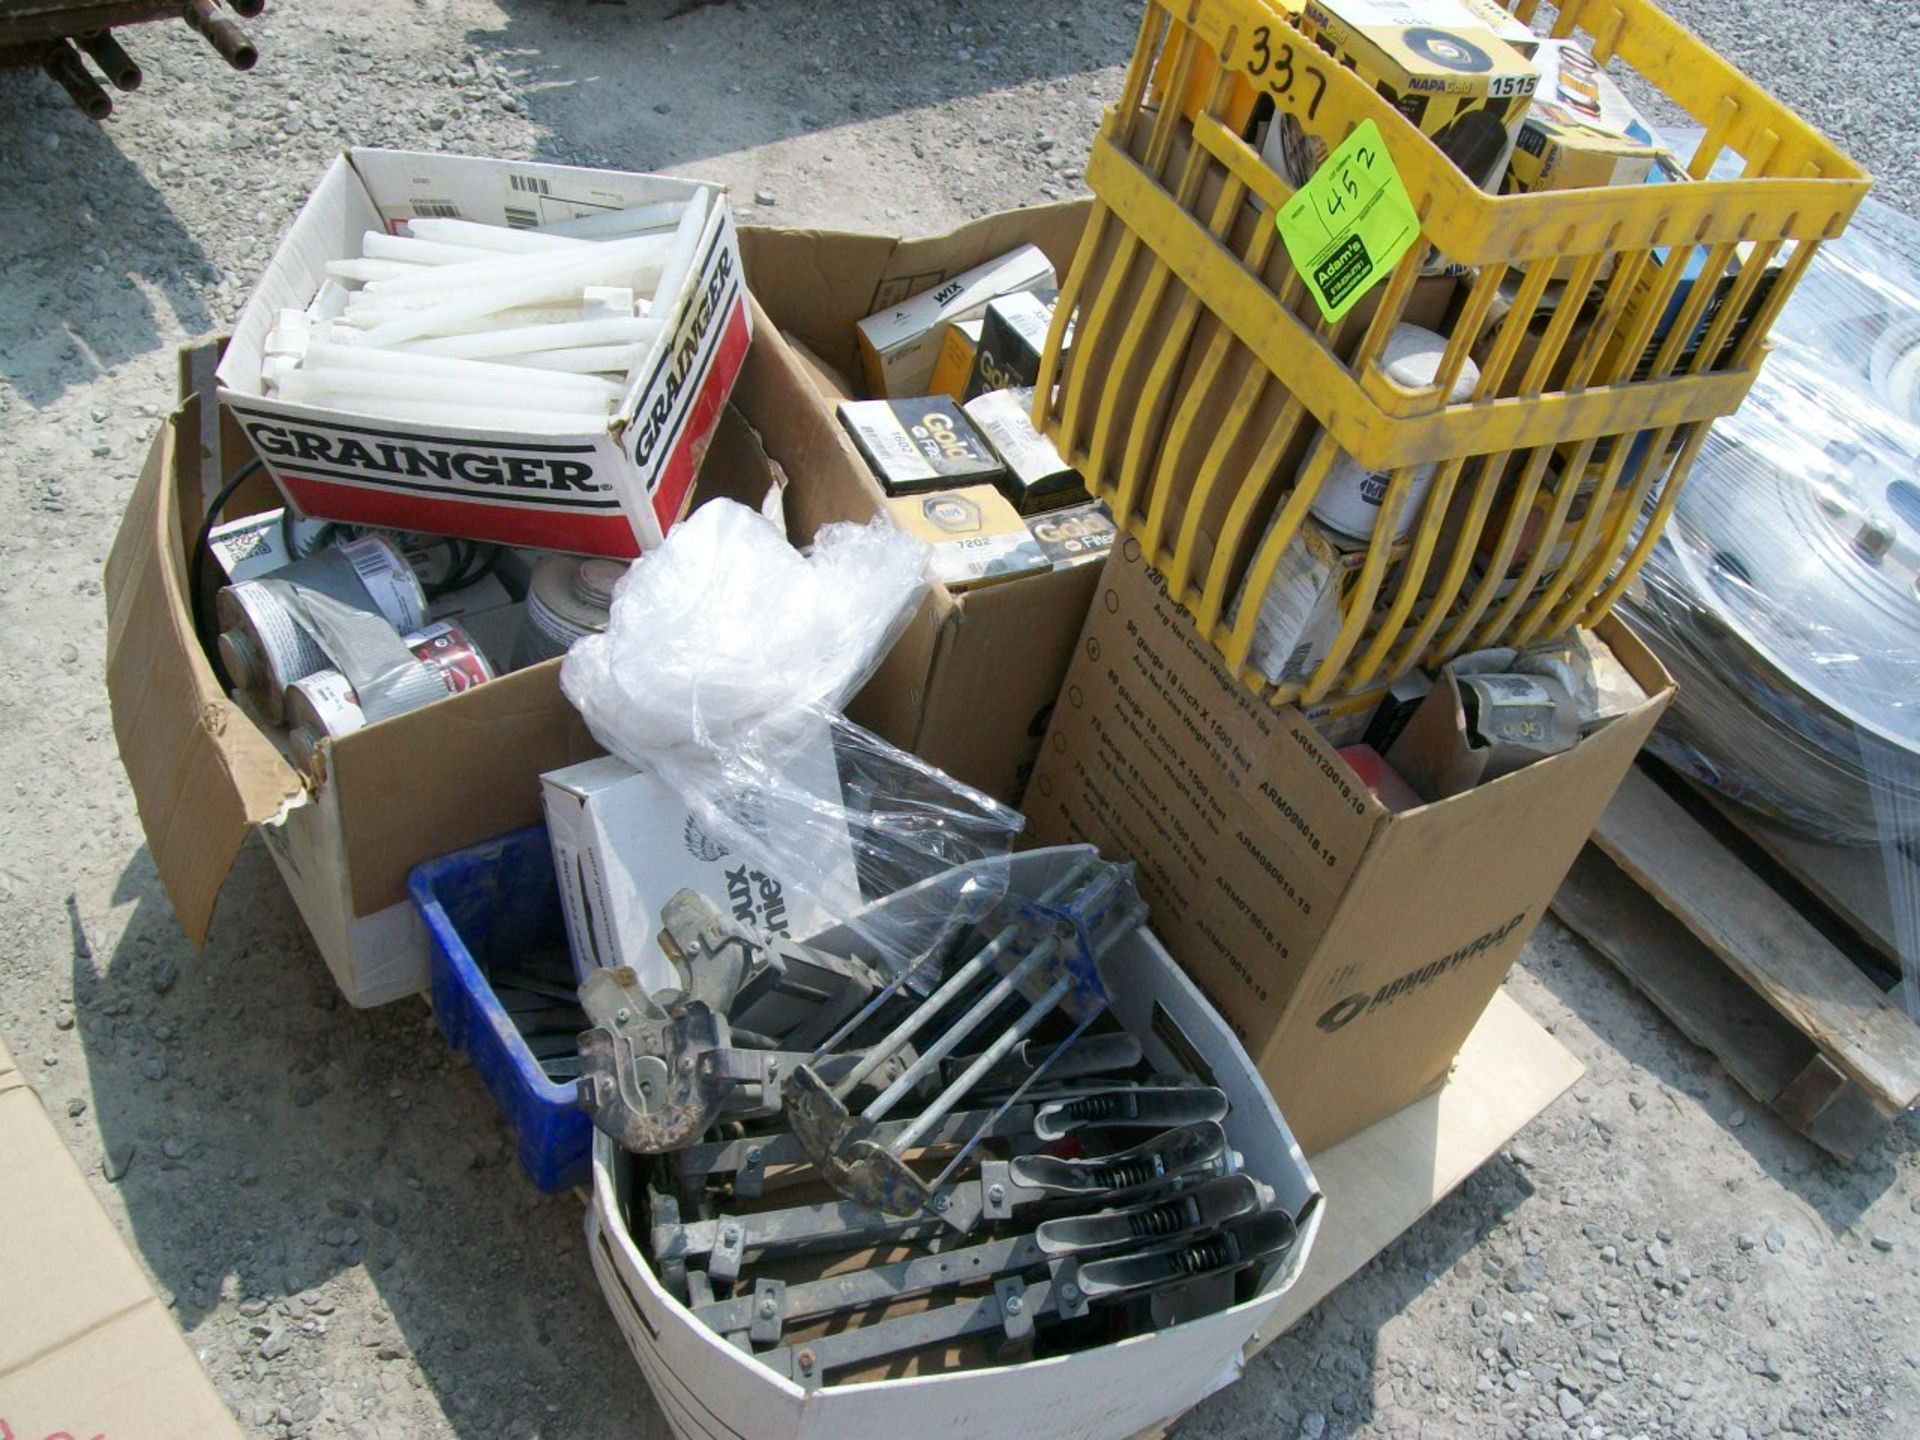 PALLET OF SHOP SUPPLIES- OIL FILTERS, FUEL FILTERS OF ALL KINDS, CAULKING GUNS & MORE